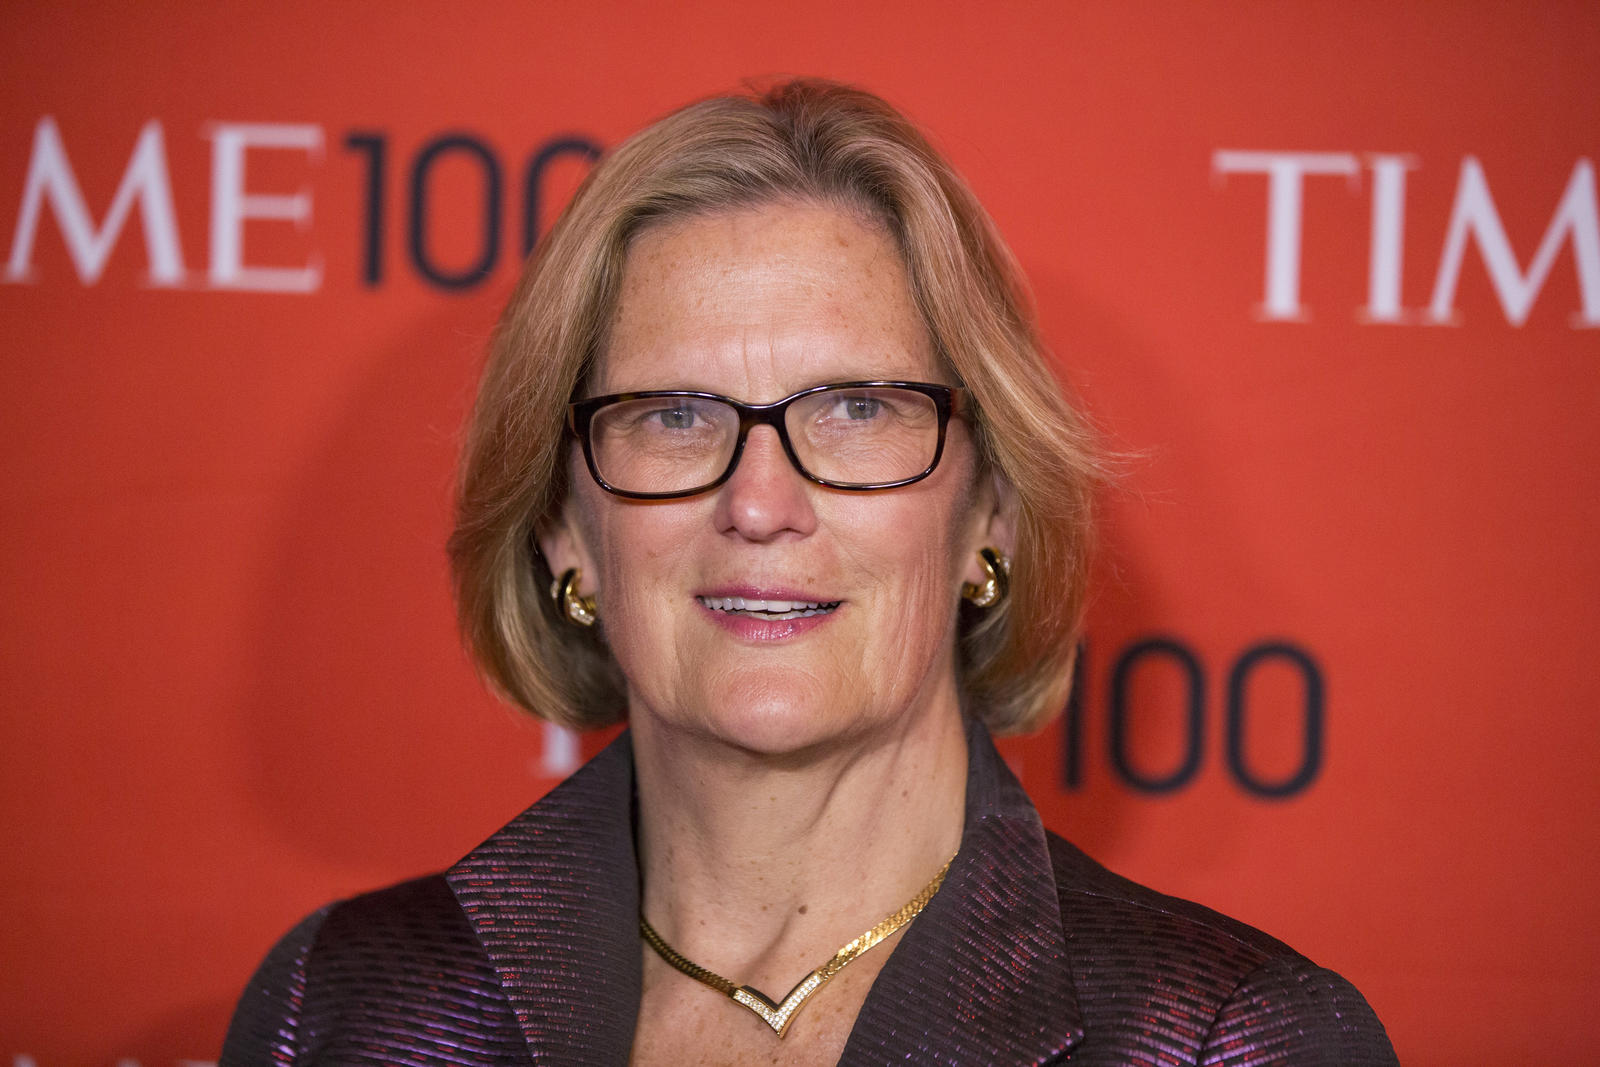 Sullivan arrives at the Time 100 gala celebrating the magazine’s naming of the 100 most influential people in the world for the past year in New York